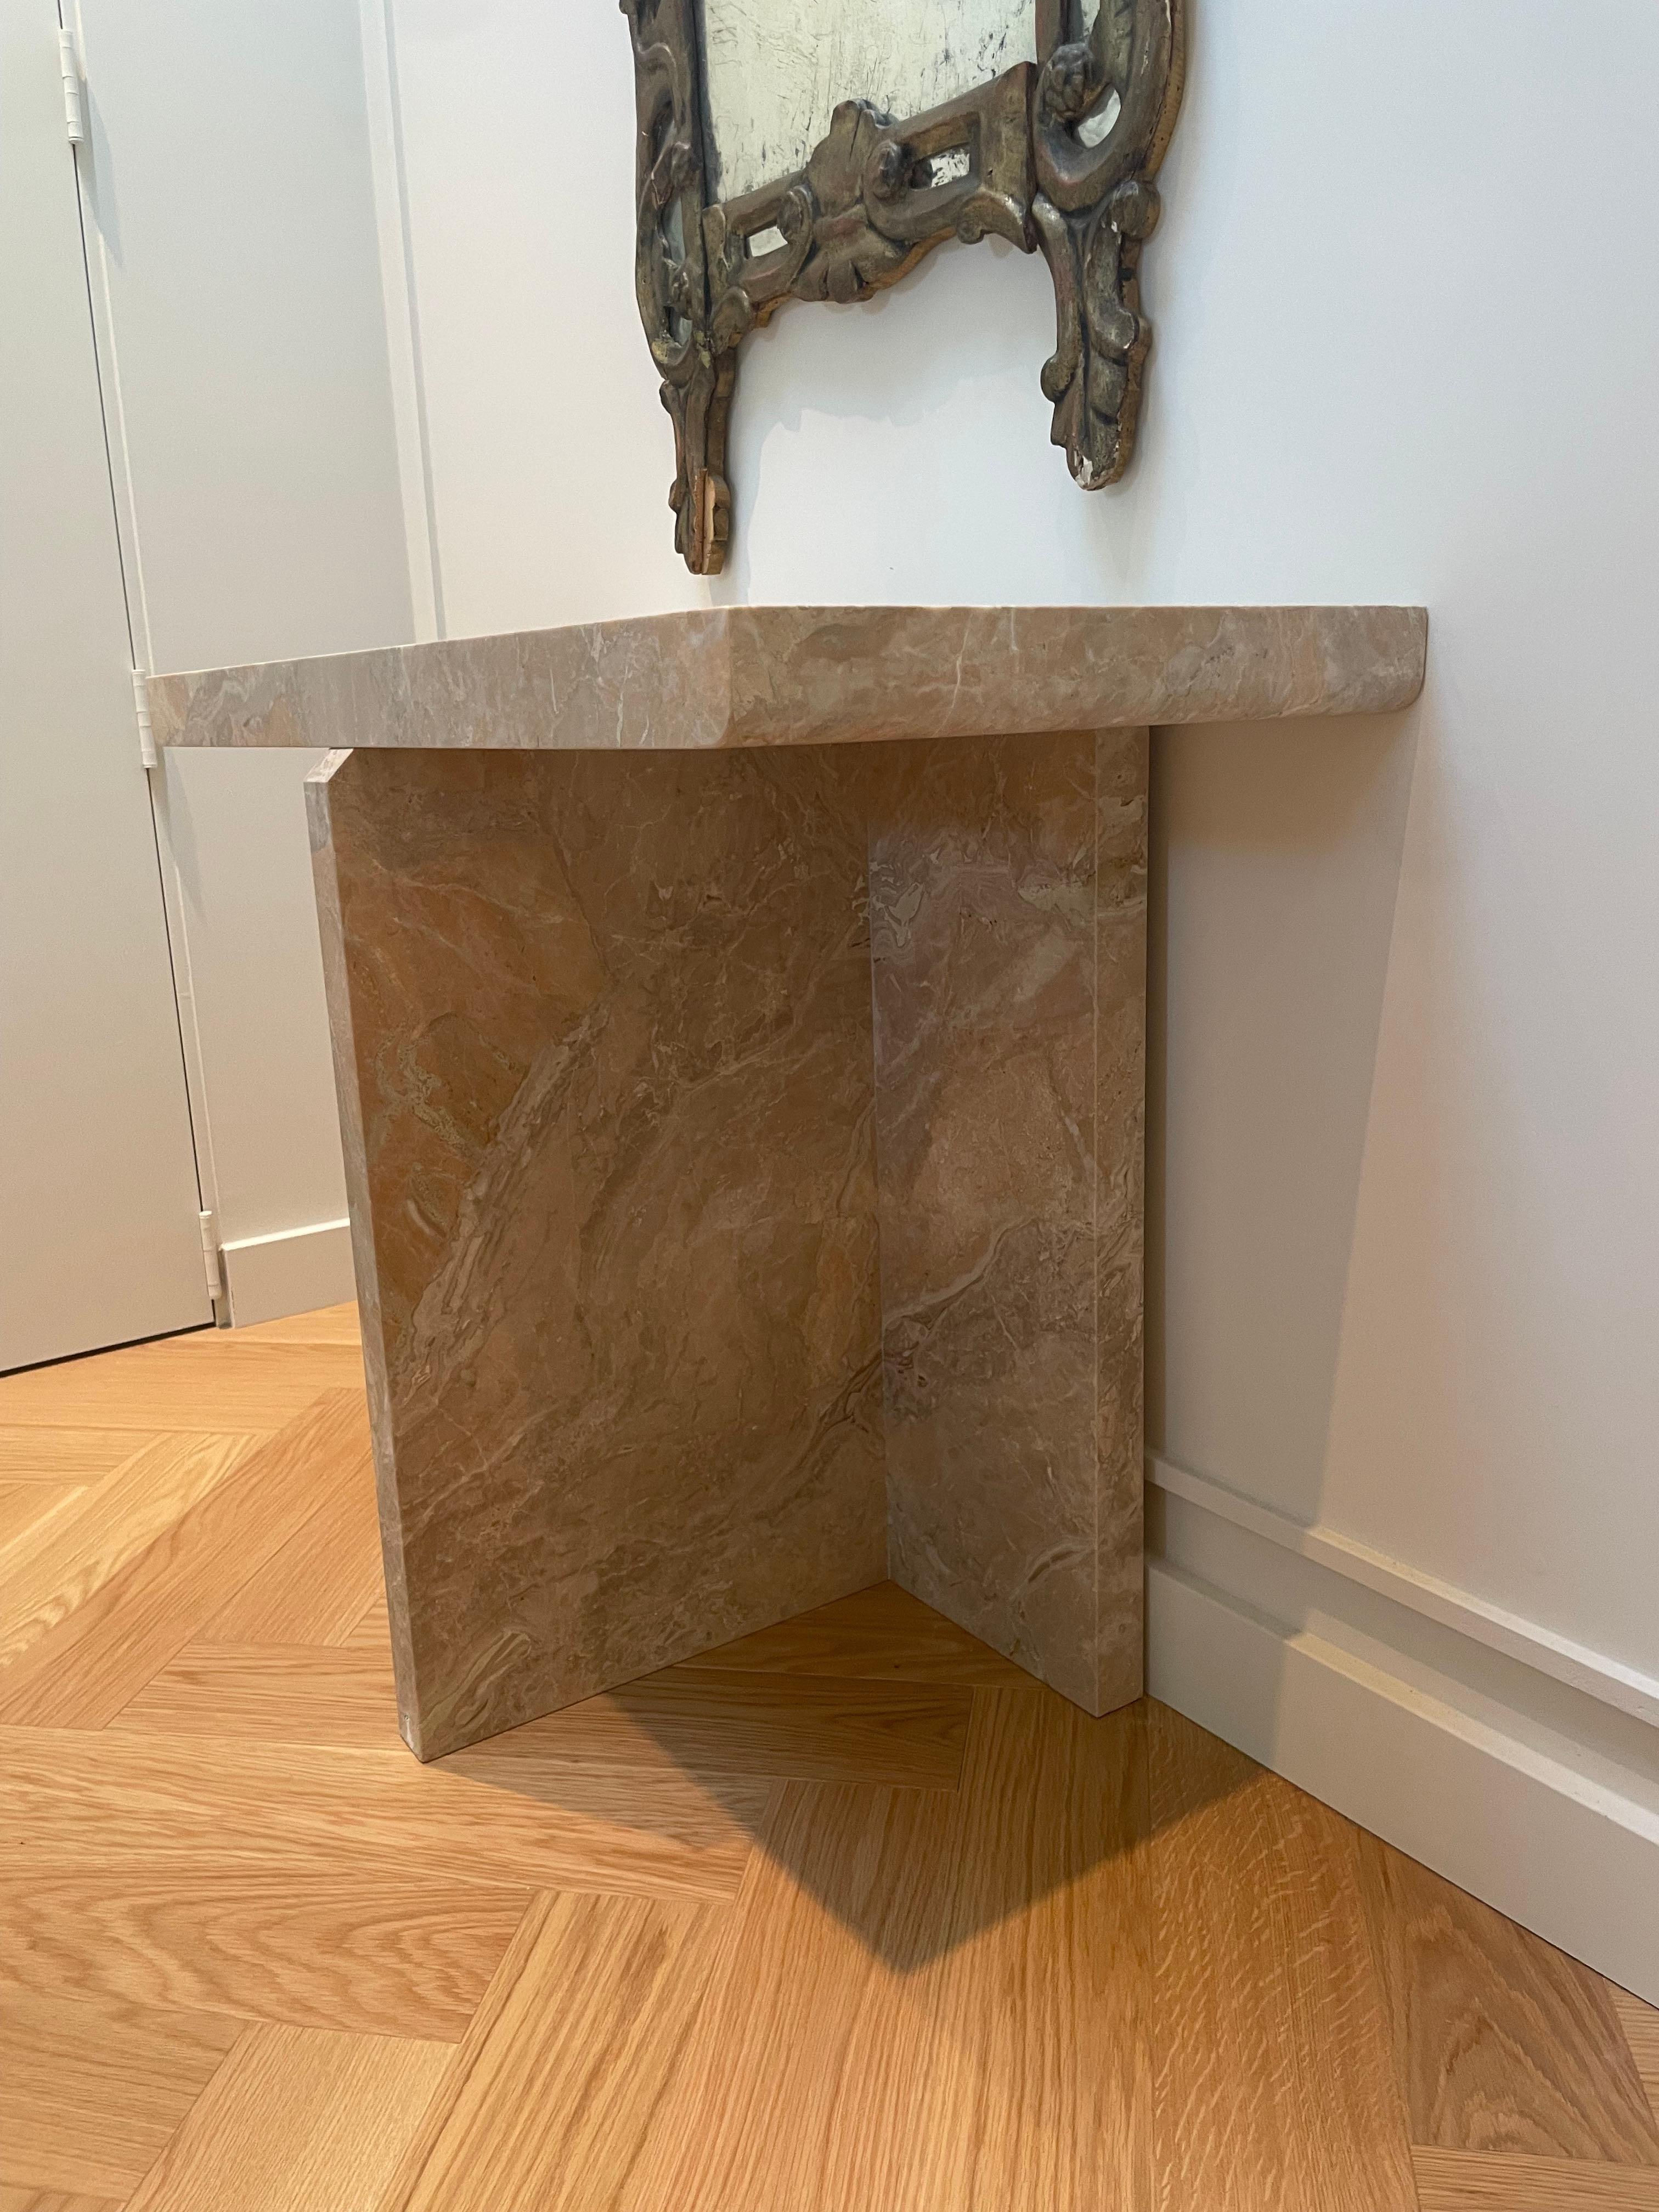 pink marble console table